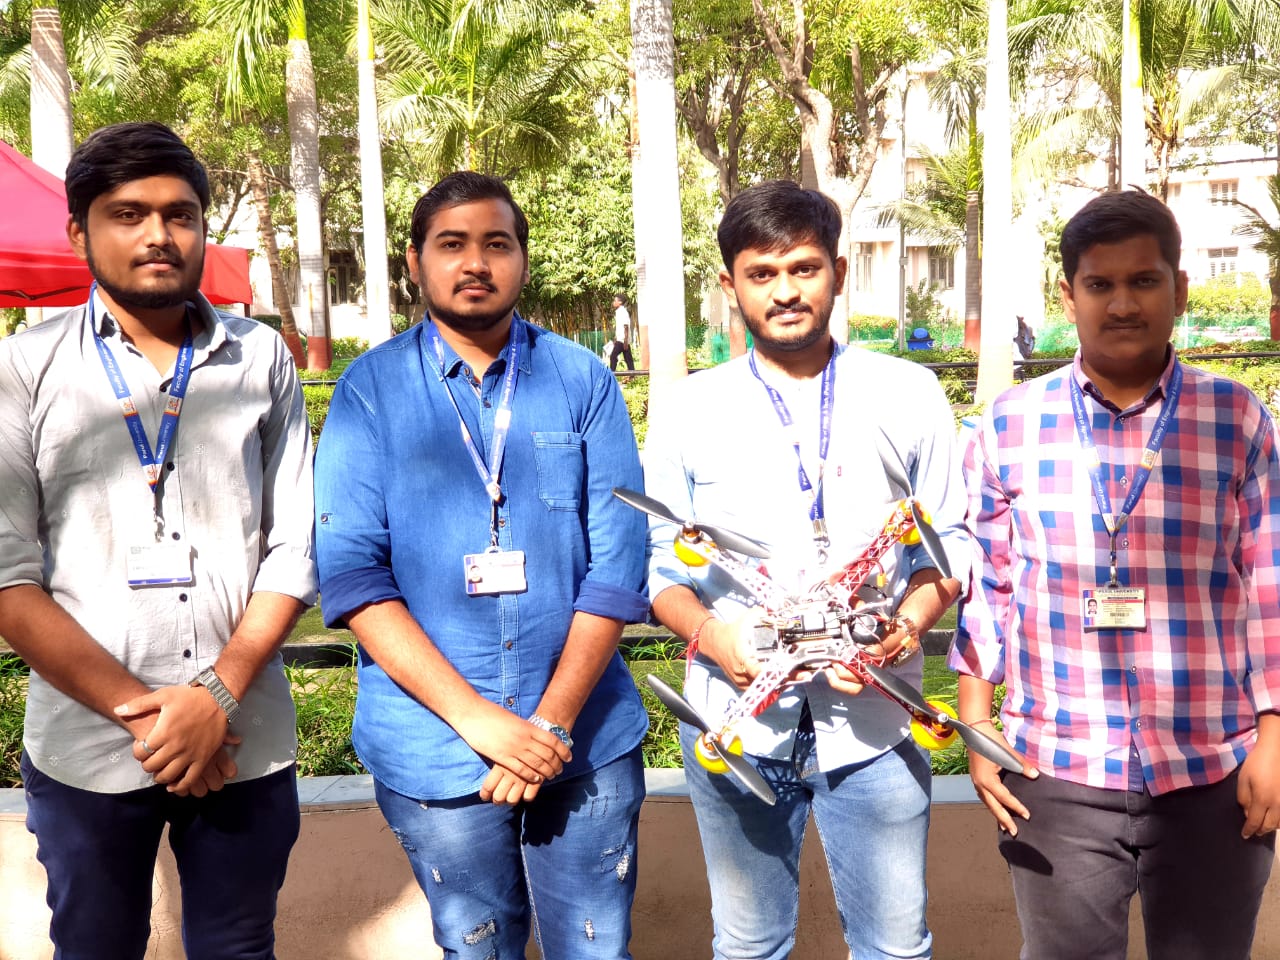 Parul University students amongst top innovators in Ideathon to combat the impact of COVID-19 pandemic